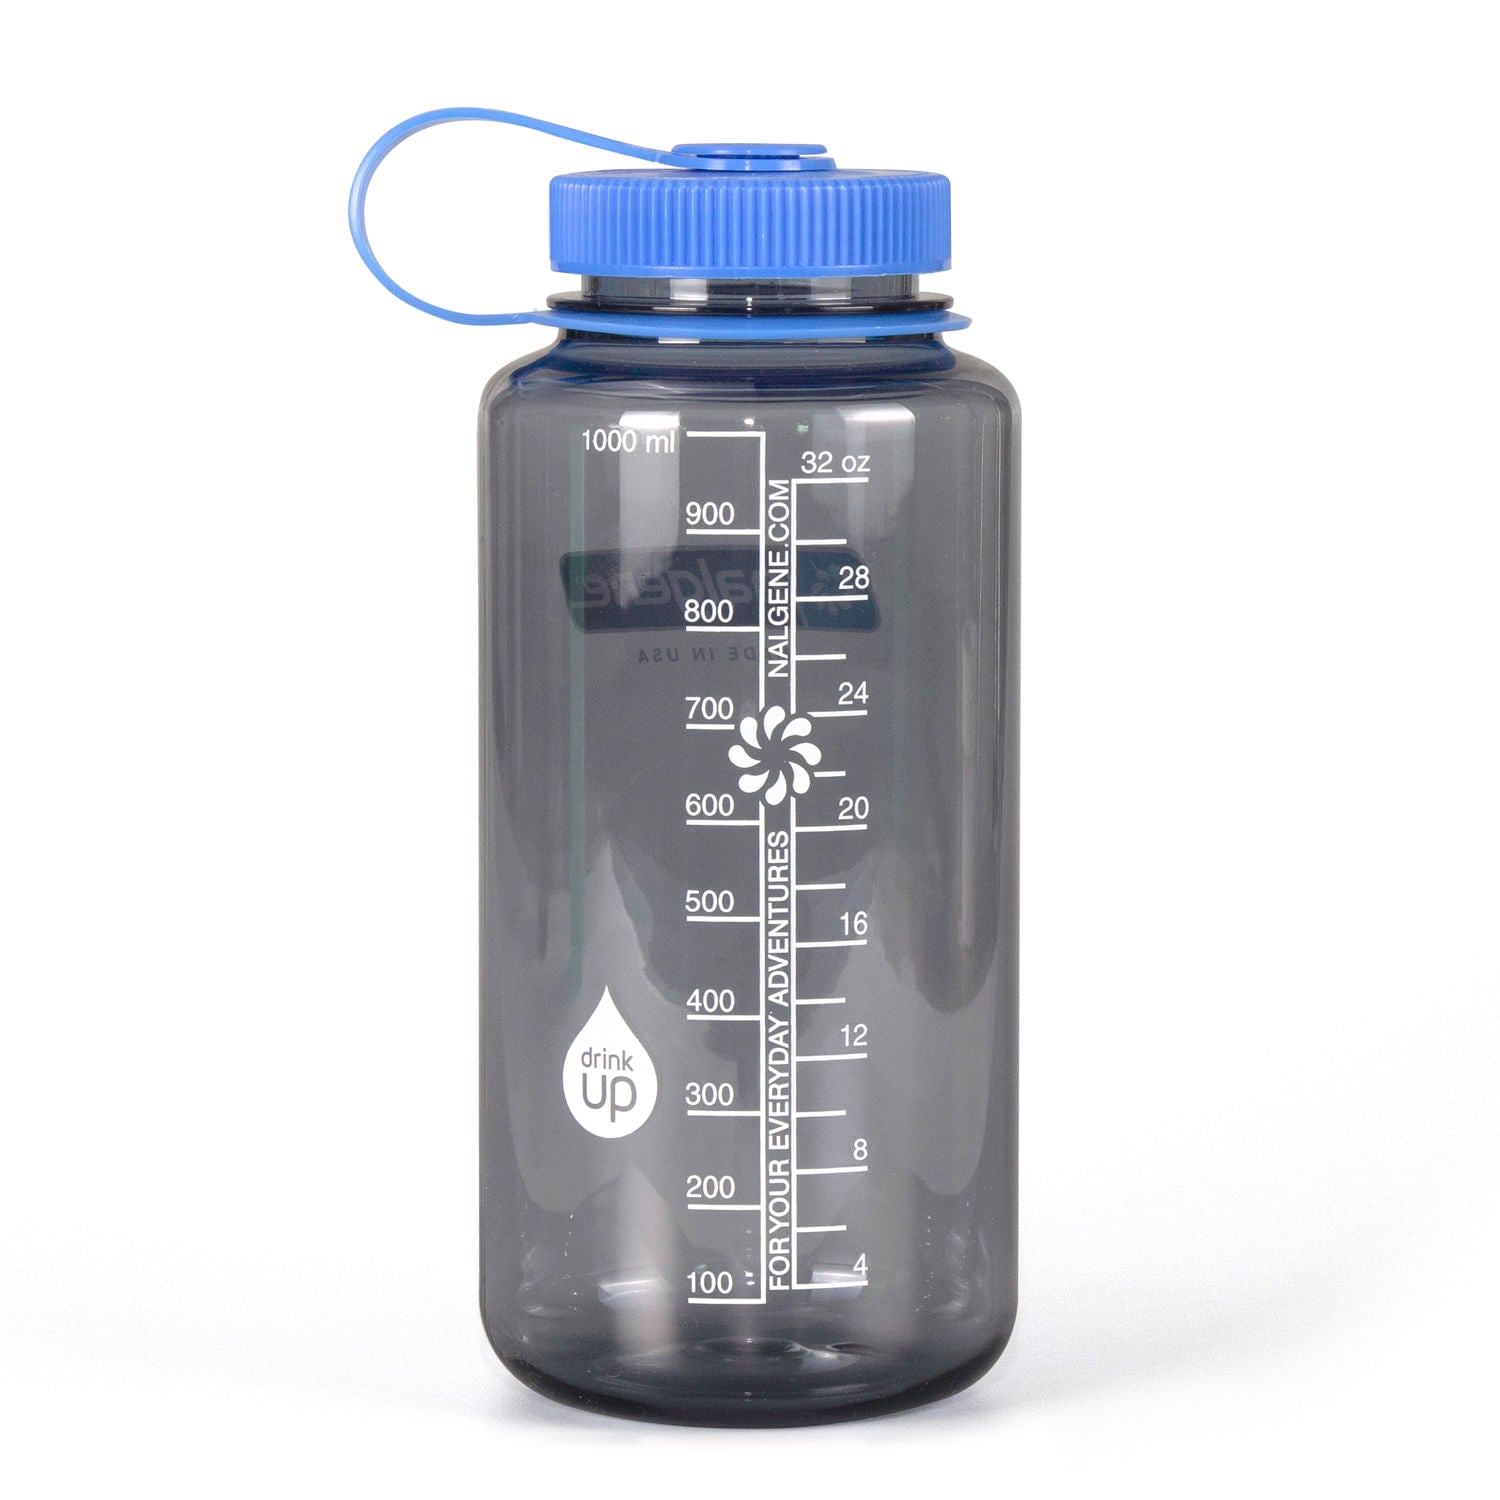 rear view Nalgene 32 ounce with measurements.